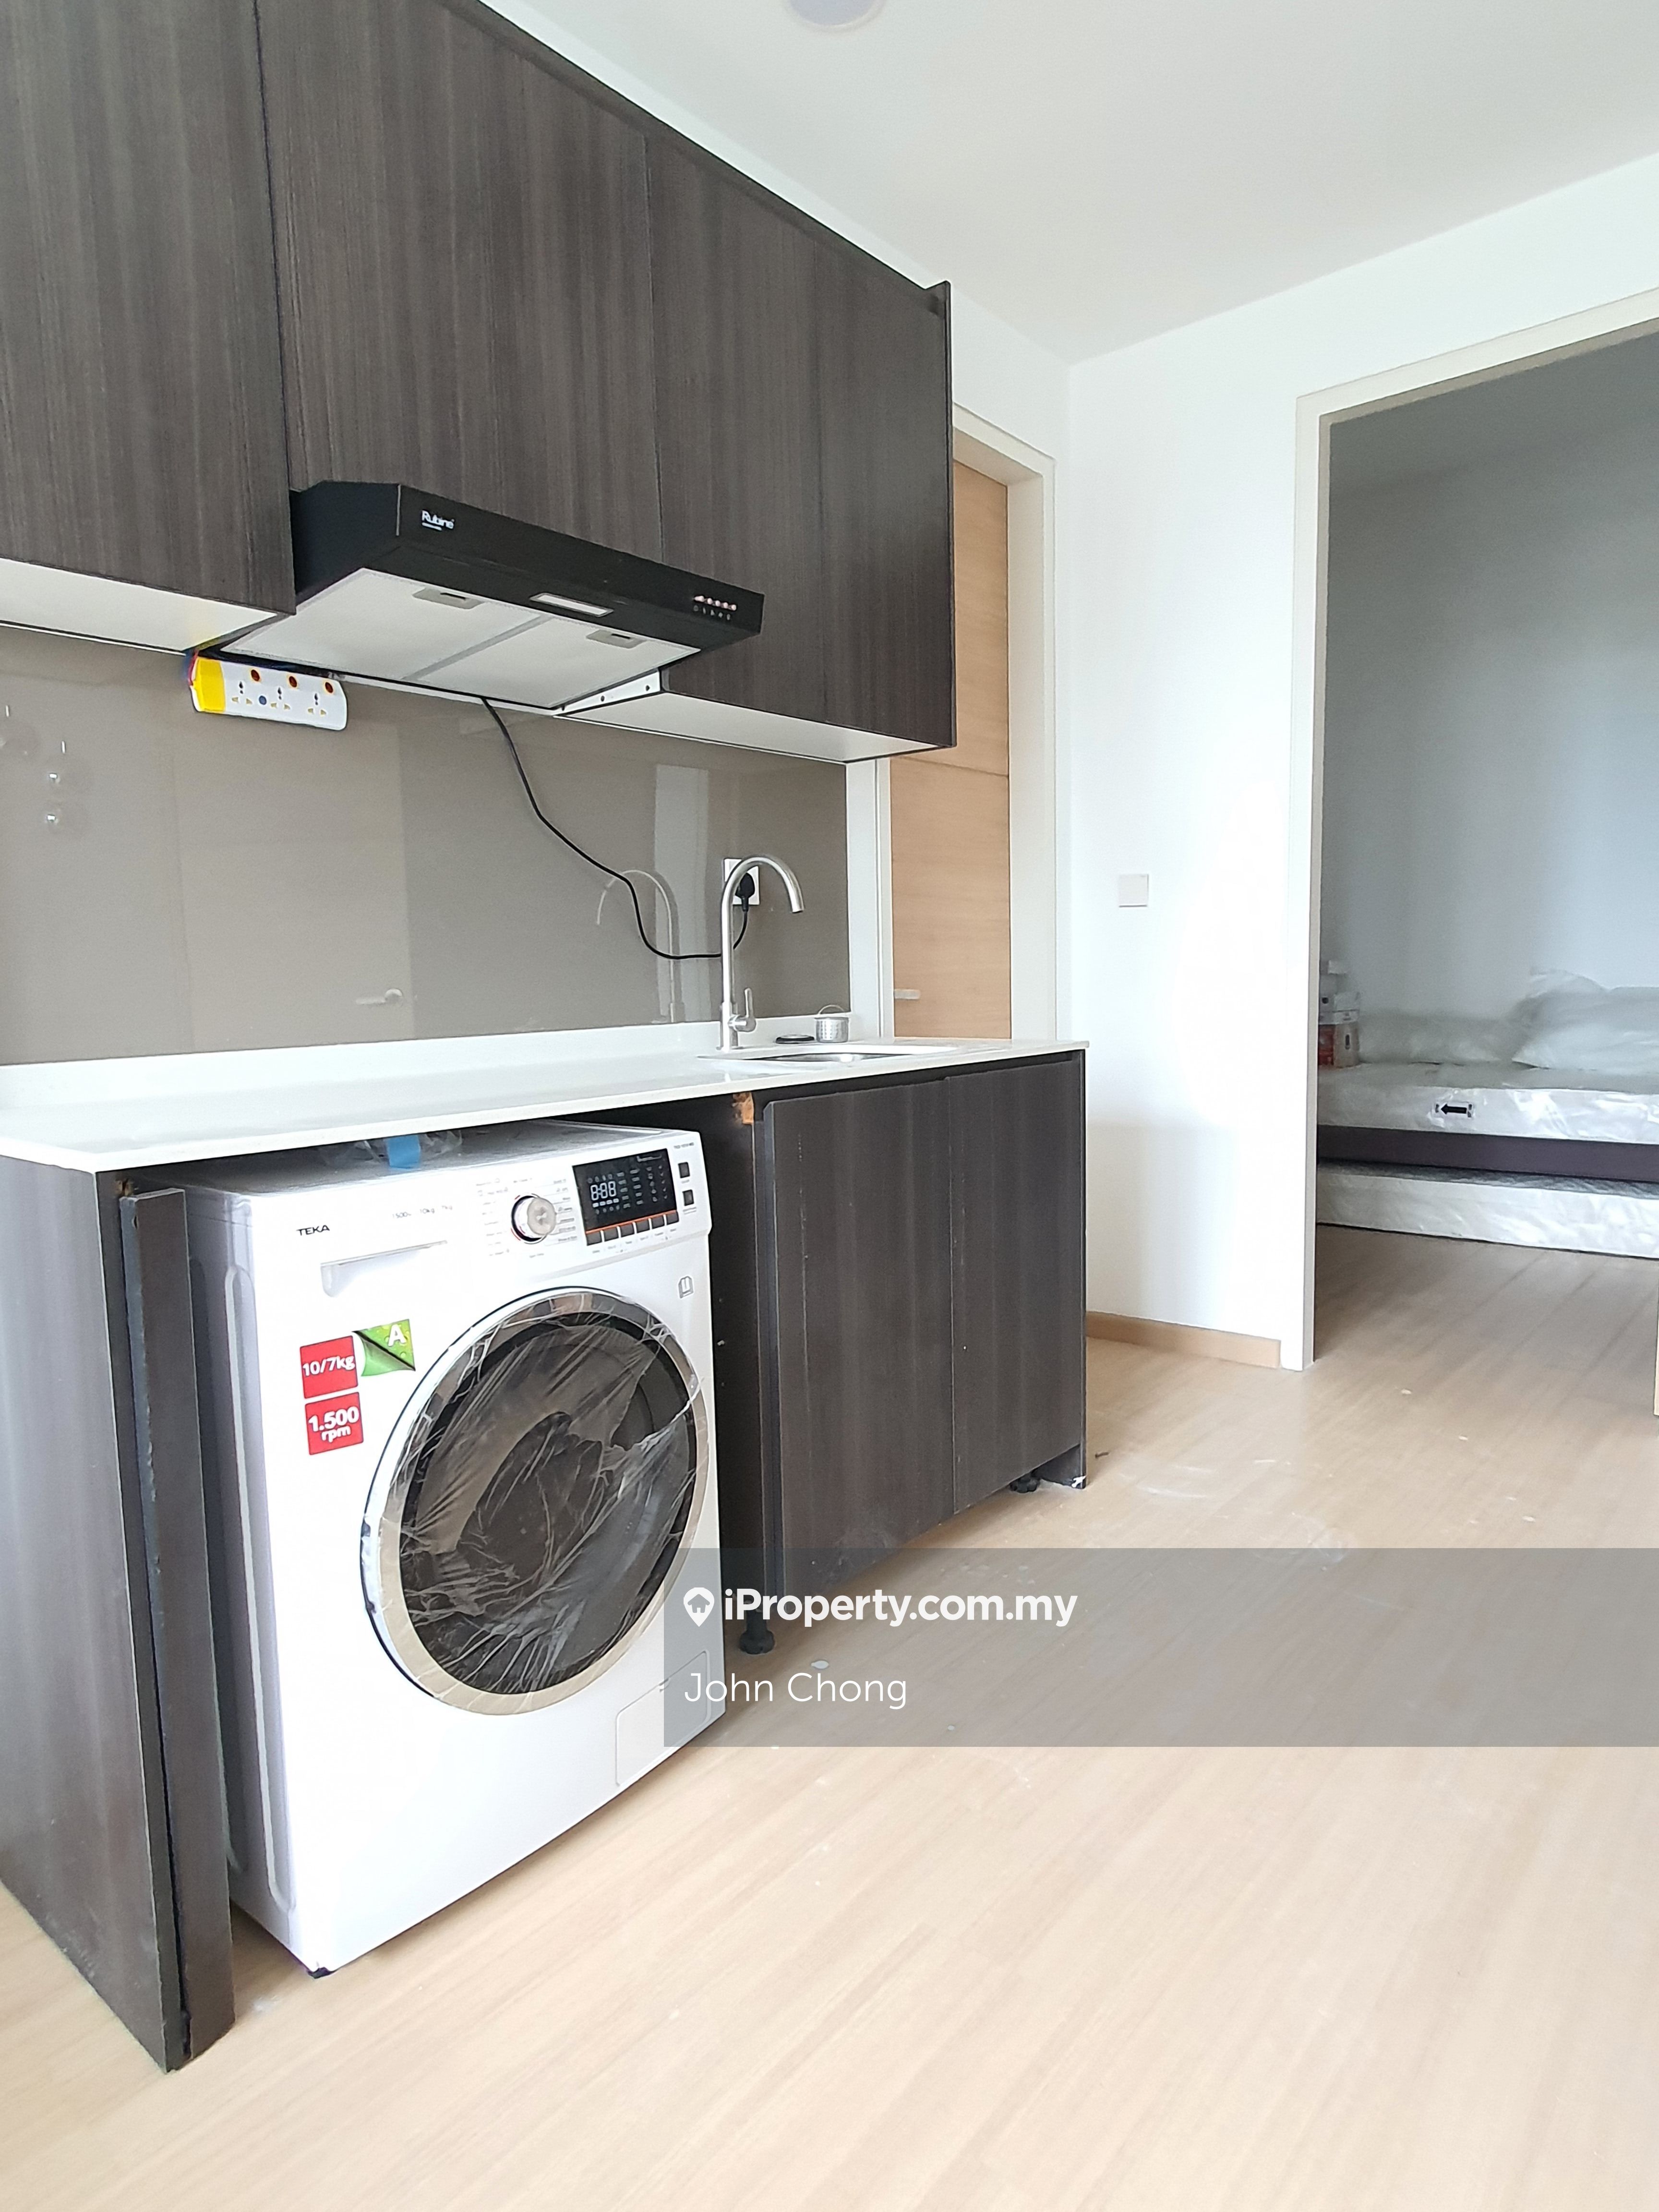 Same row with Garden international school, fully-furnished with washer